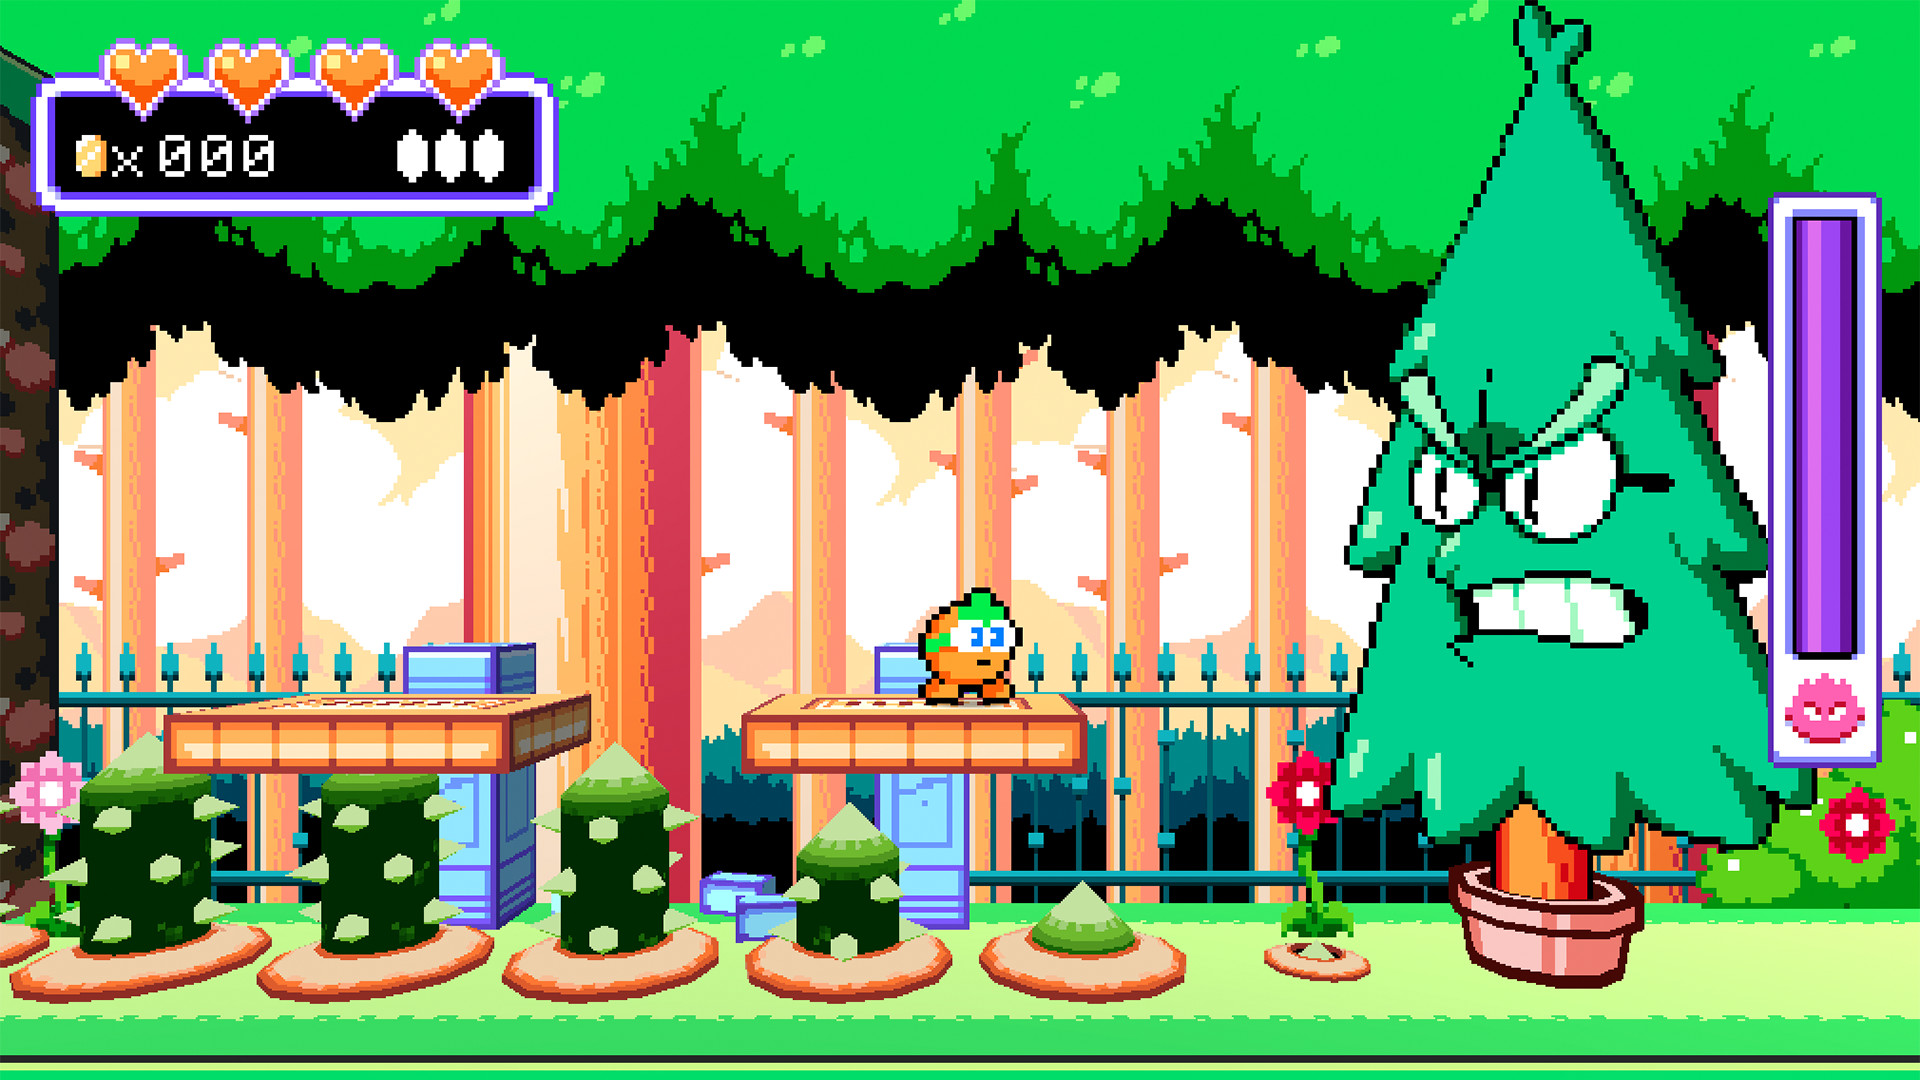 rog standing on a platform in a forest, thorny spike trap underneath, facing an evergreen tree-themed boss enemy